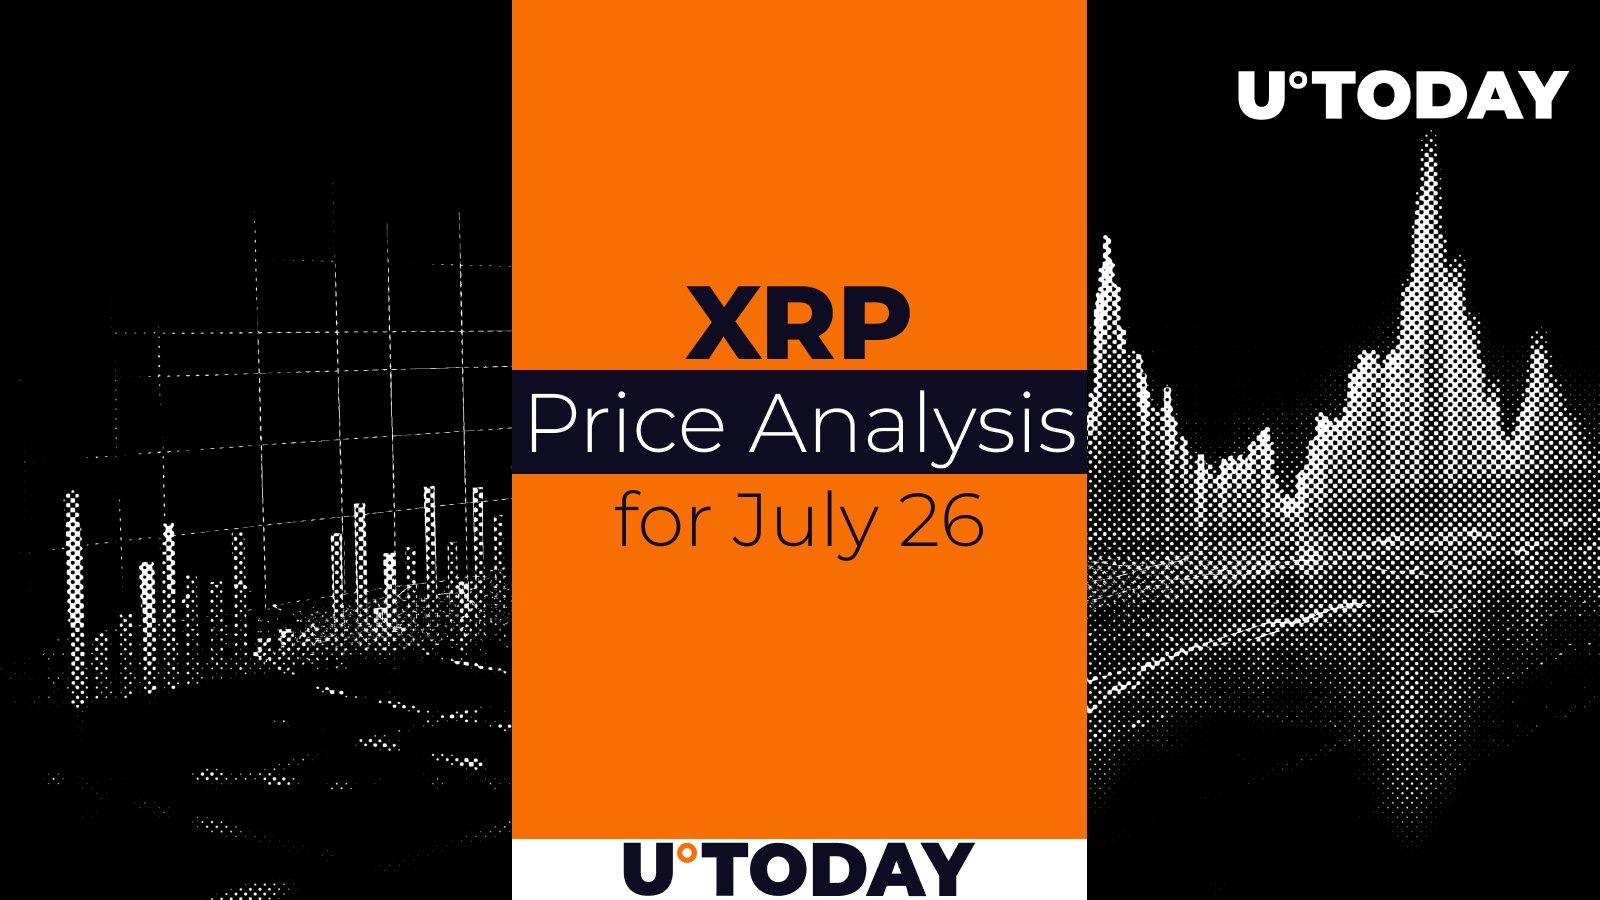 XRP Prediction for July 26